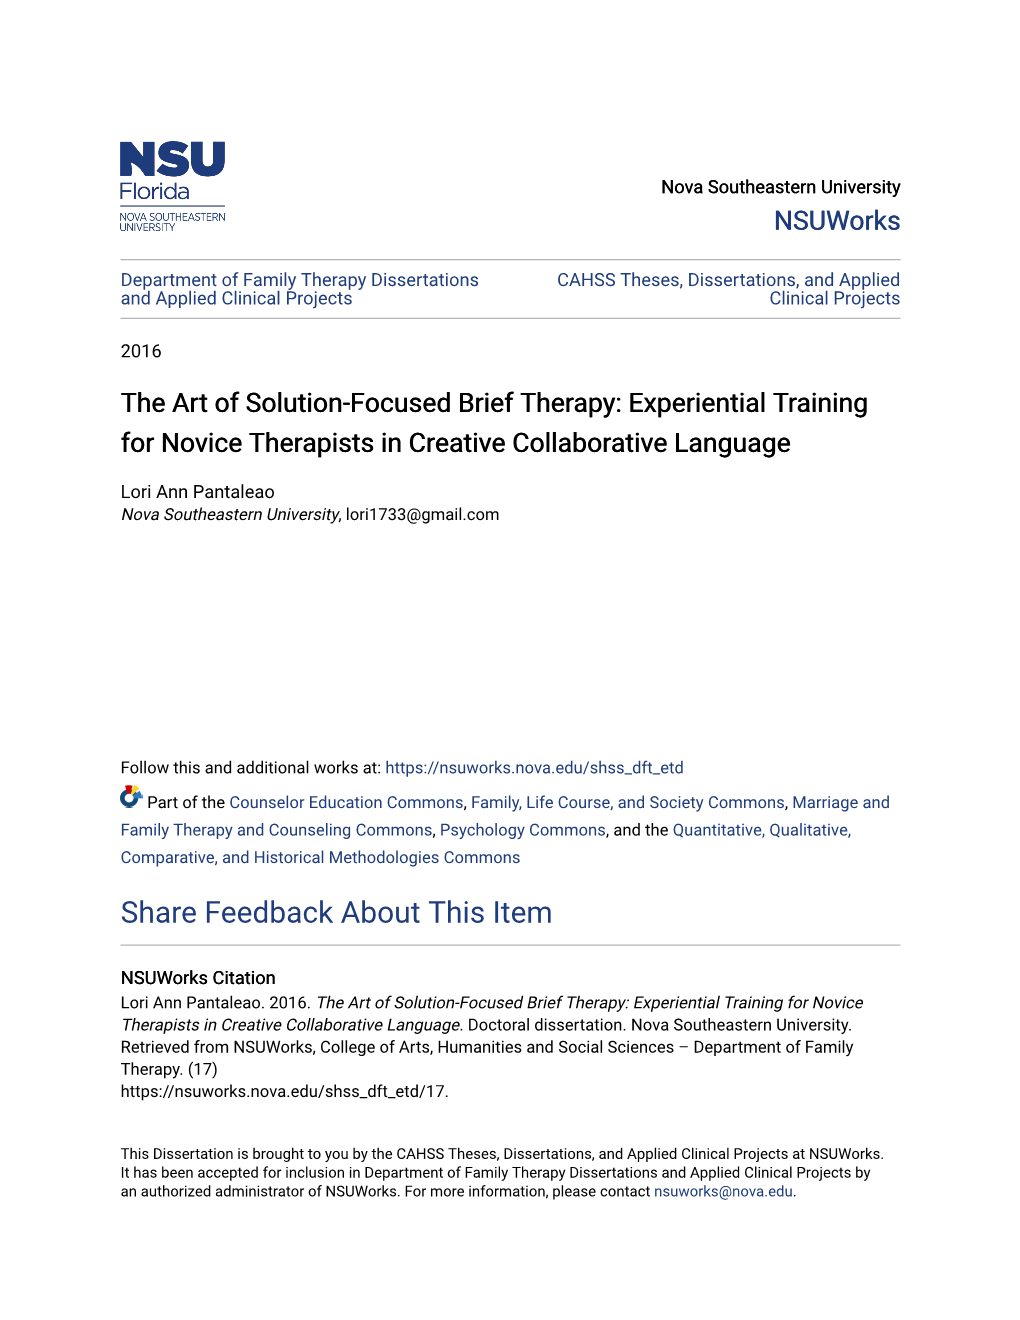 The Art of Solution-Focused Brief Therapy: Experiential Training for Novice Therapists in Creative Collaborative Language